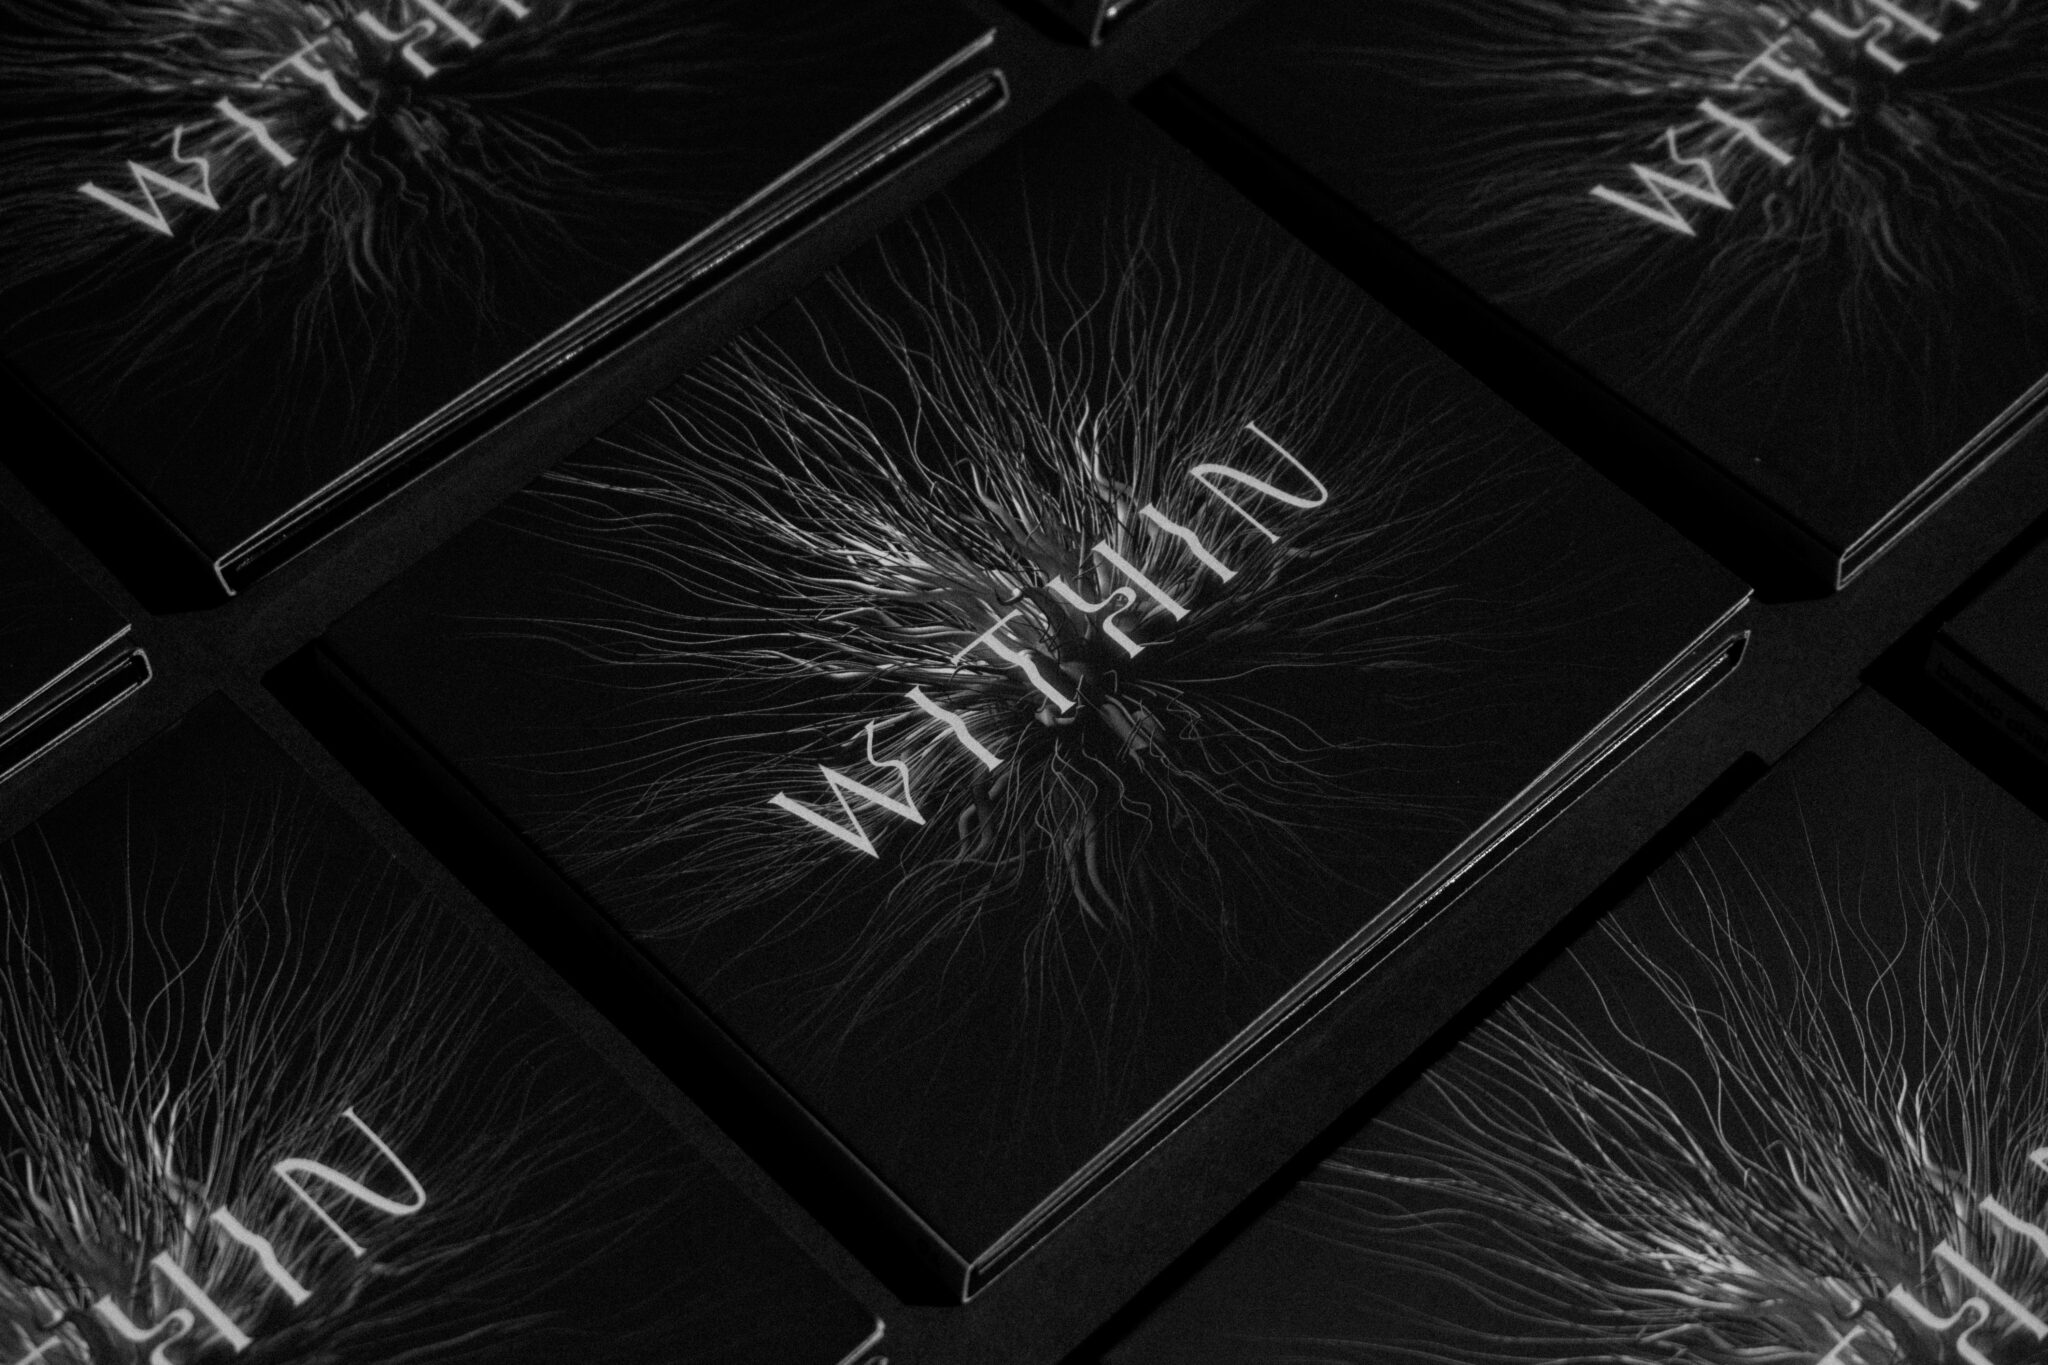 WITHIN-01